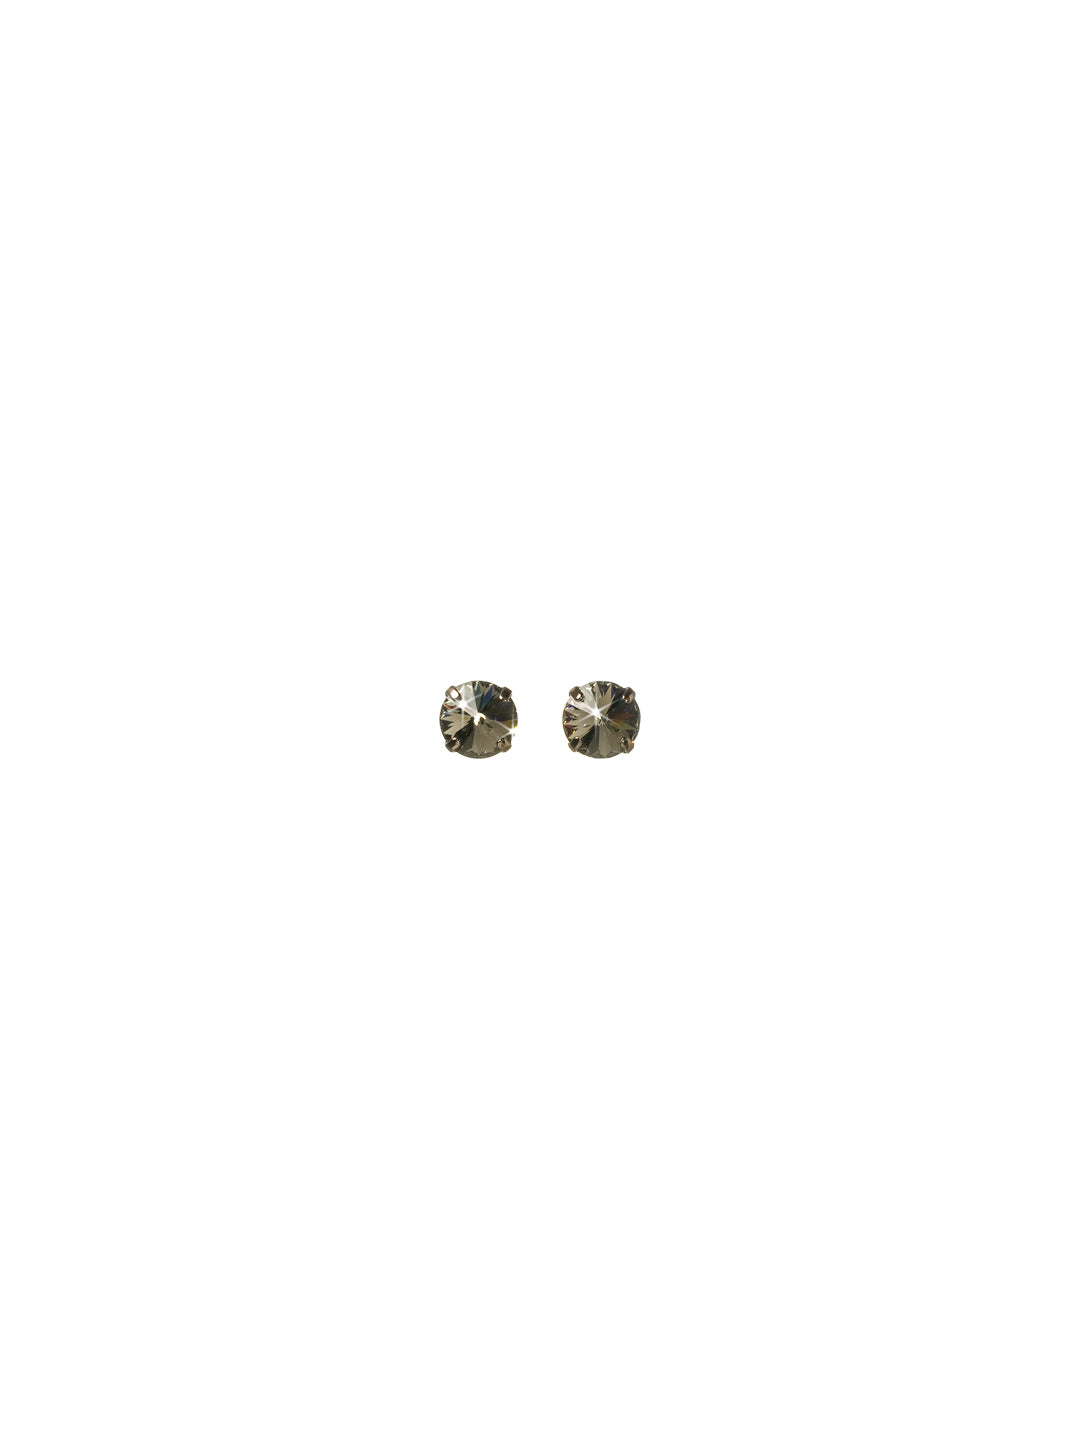 London Stud Earrings - ECM14GMBD - <p>Everyone needs a great pair of studs. Add some classic sparkle to any occasion with these stud earrings. Need help picking a stud? <a href="https://www.sorrelli.com/blogs/sisterhood/round-stud-earrings-101-a-rundown-of-sizes-styles-and-sparkle">Check out our size guide!</a> From Sorrelli's Black Diamond collection in our Gun Metal finish.</p>